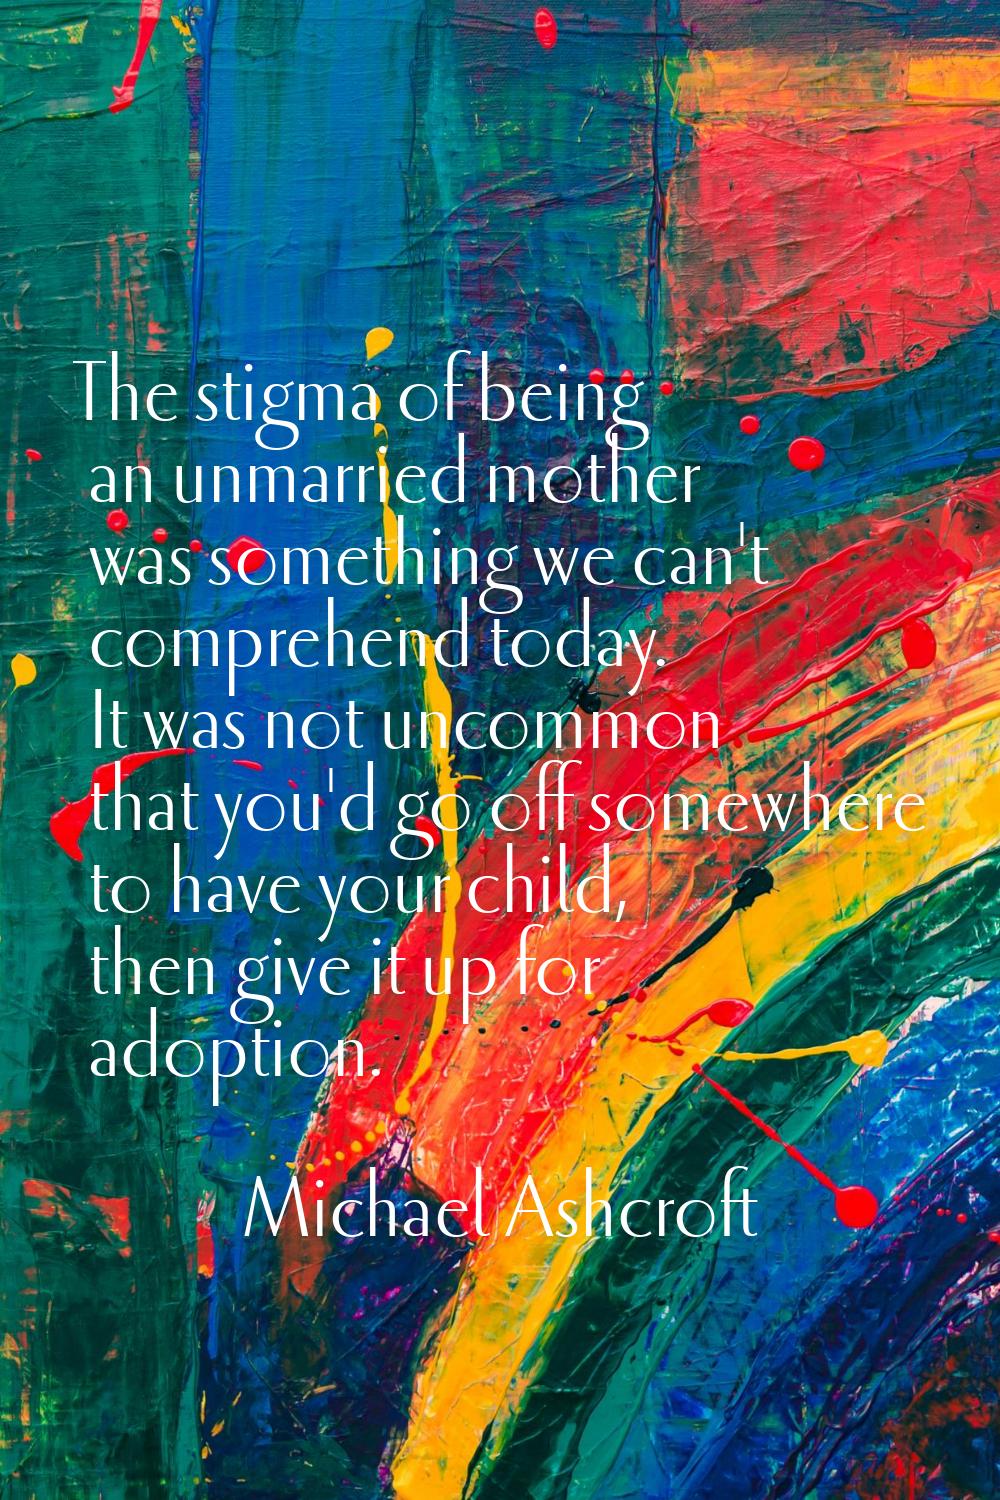 The stigma of being an unmarried mother was something we can't comprehend today. It was not uncommo